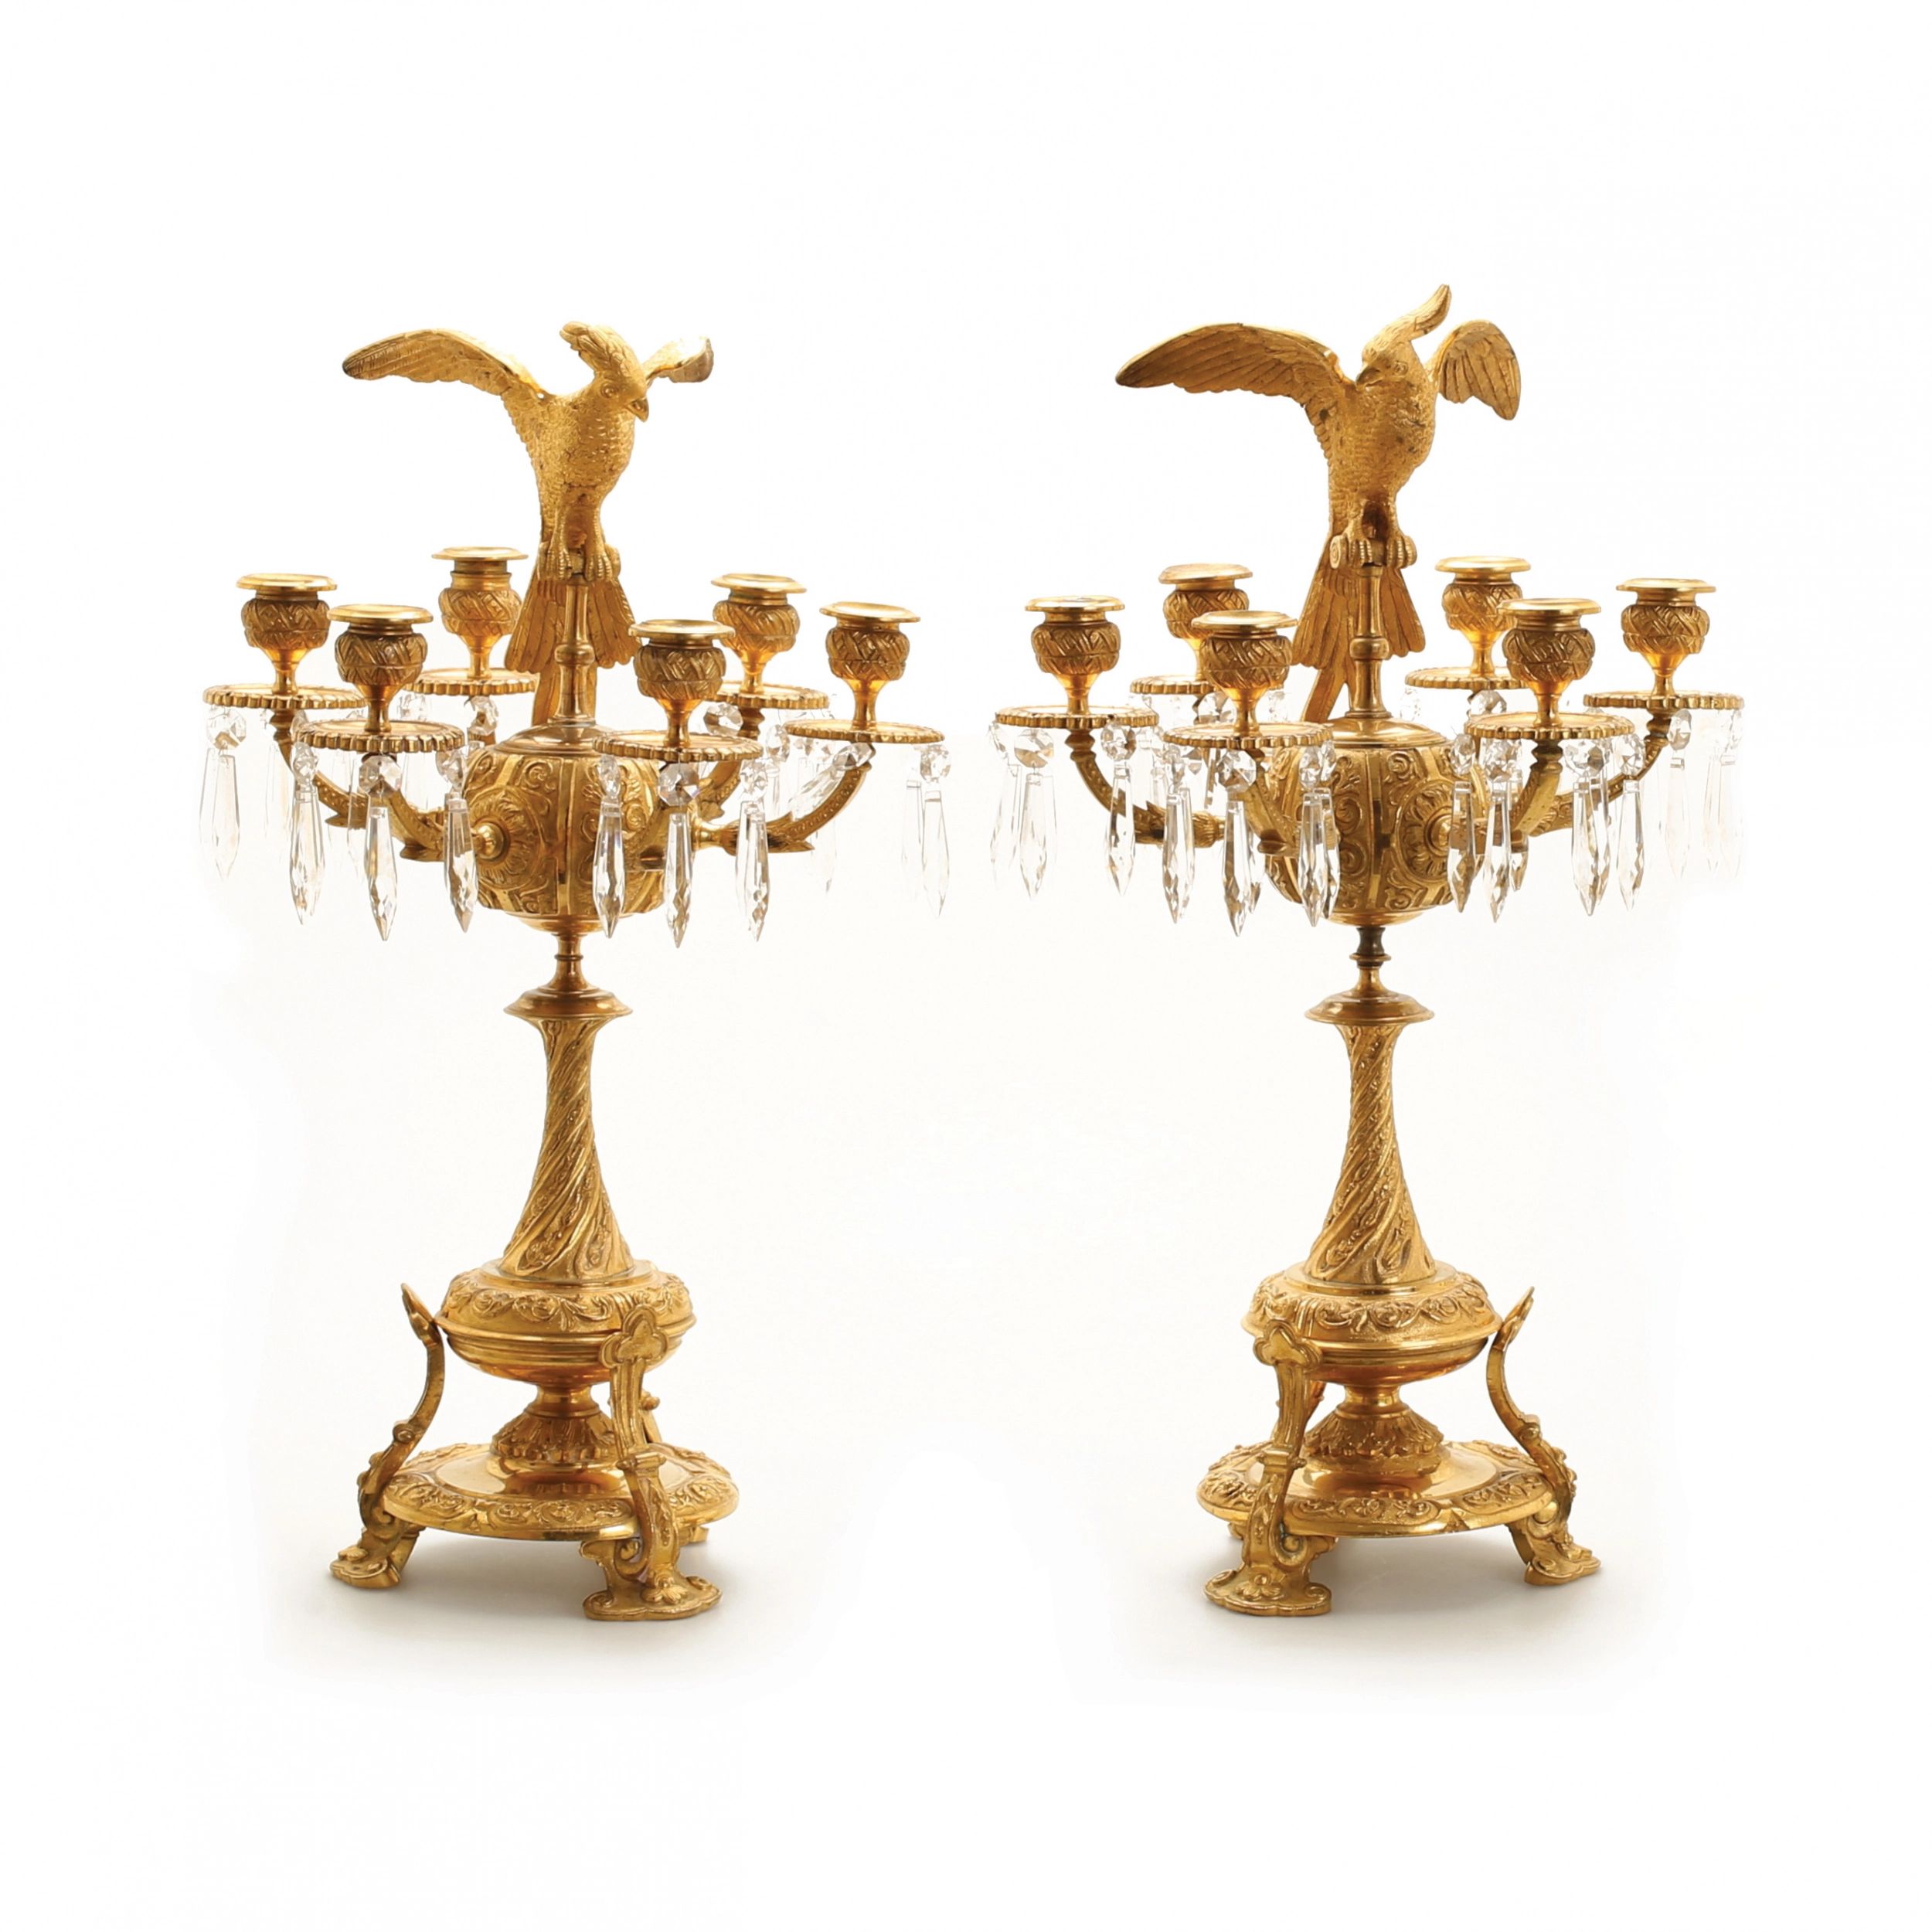 Pair-of-candelabra-with-figures-of-birds-of-paradise-